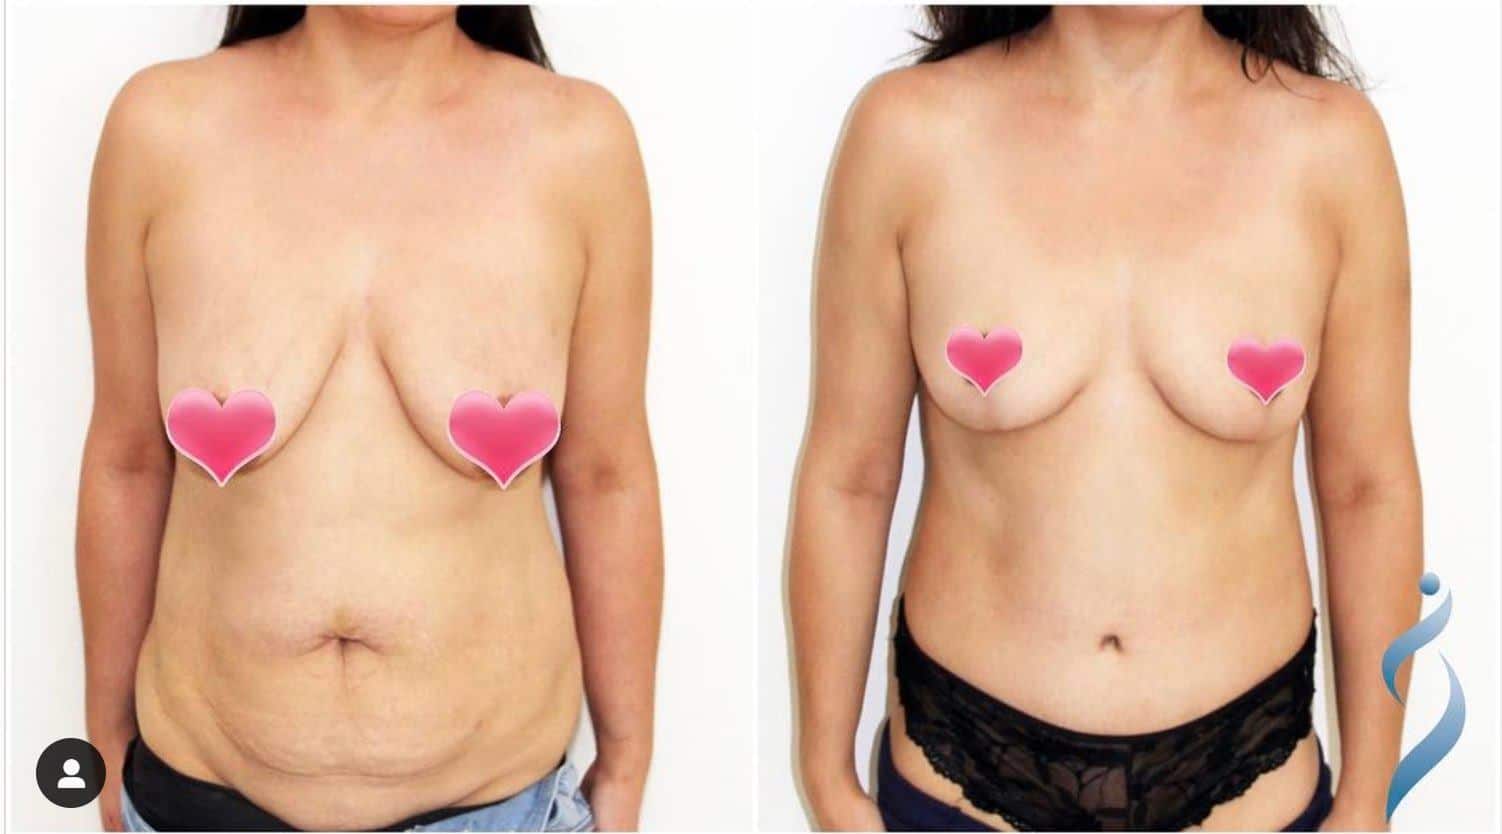 A before and after of a woman who has had a tummy tuck (abdominoplasty) procedure